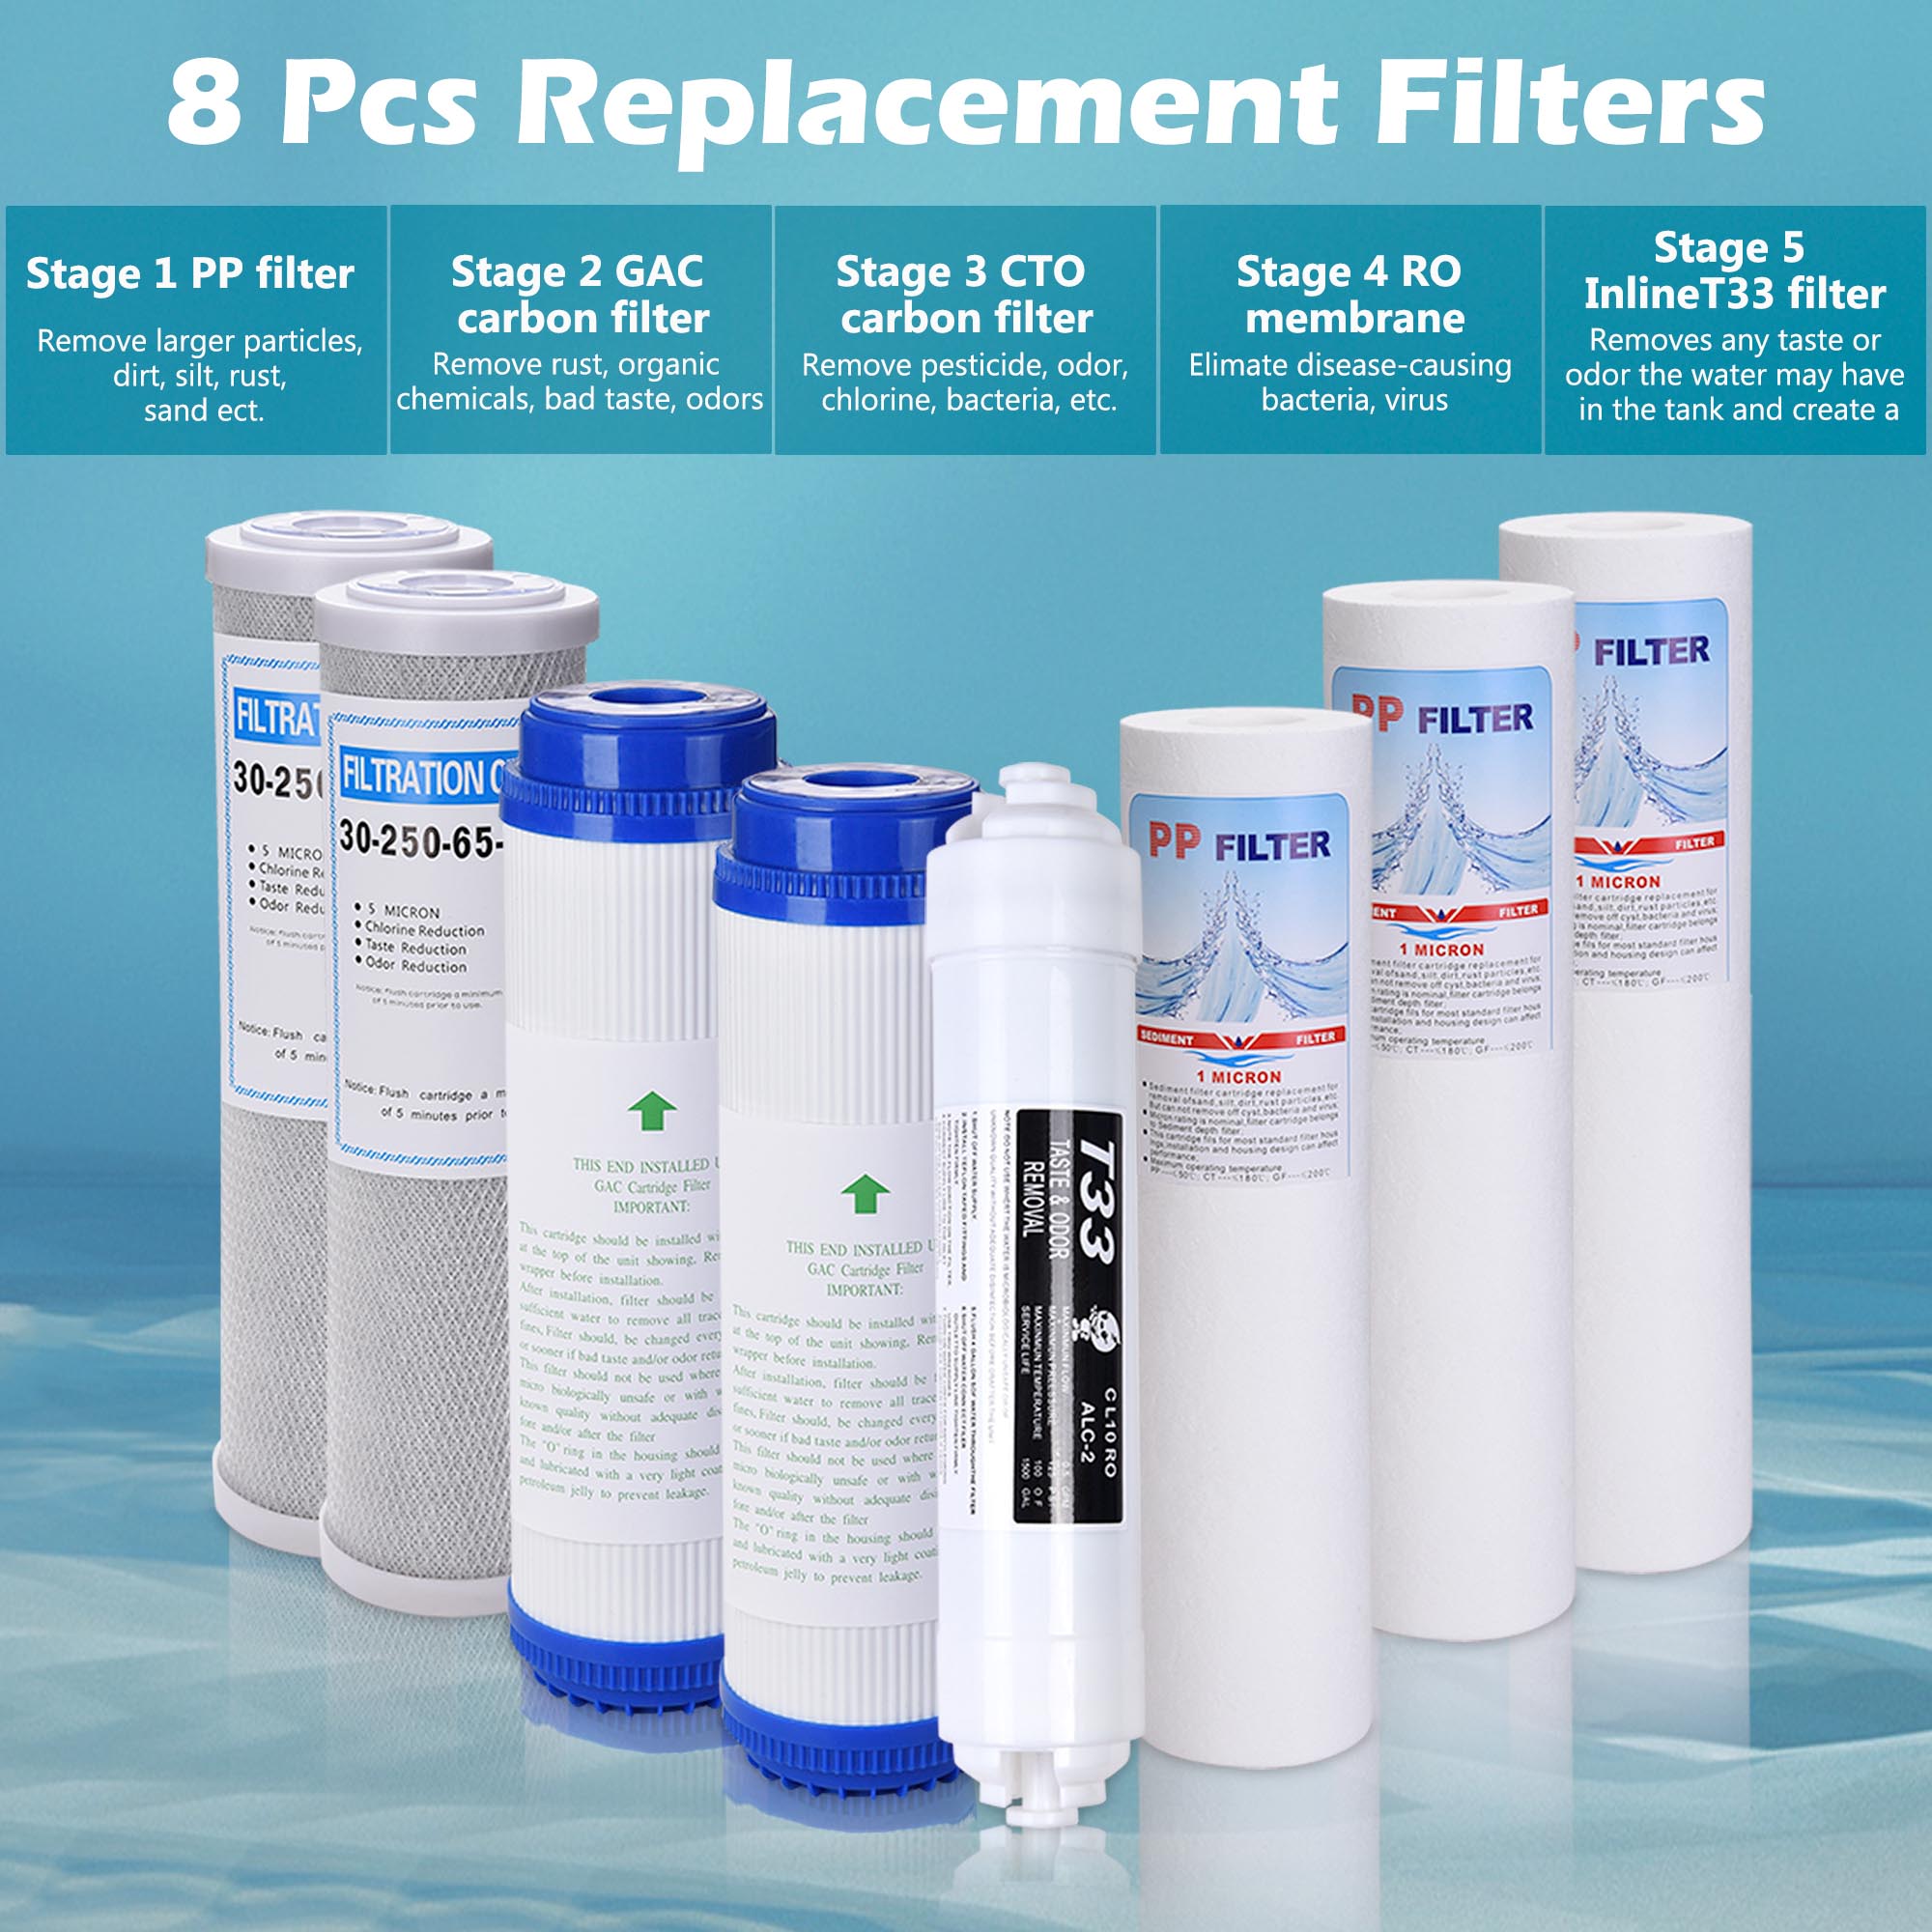 Yescom 5 Stage Reverse Osmosis System Replacement Filter Set RO Cartridges (8 pcs)